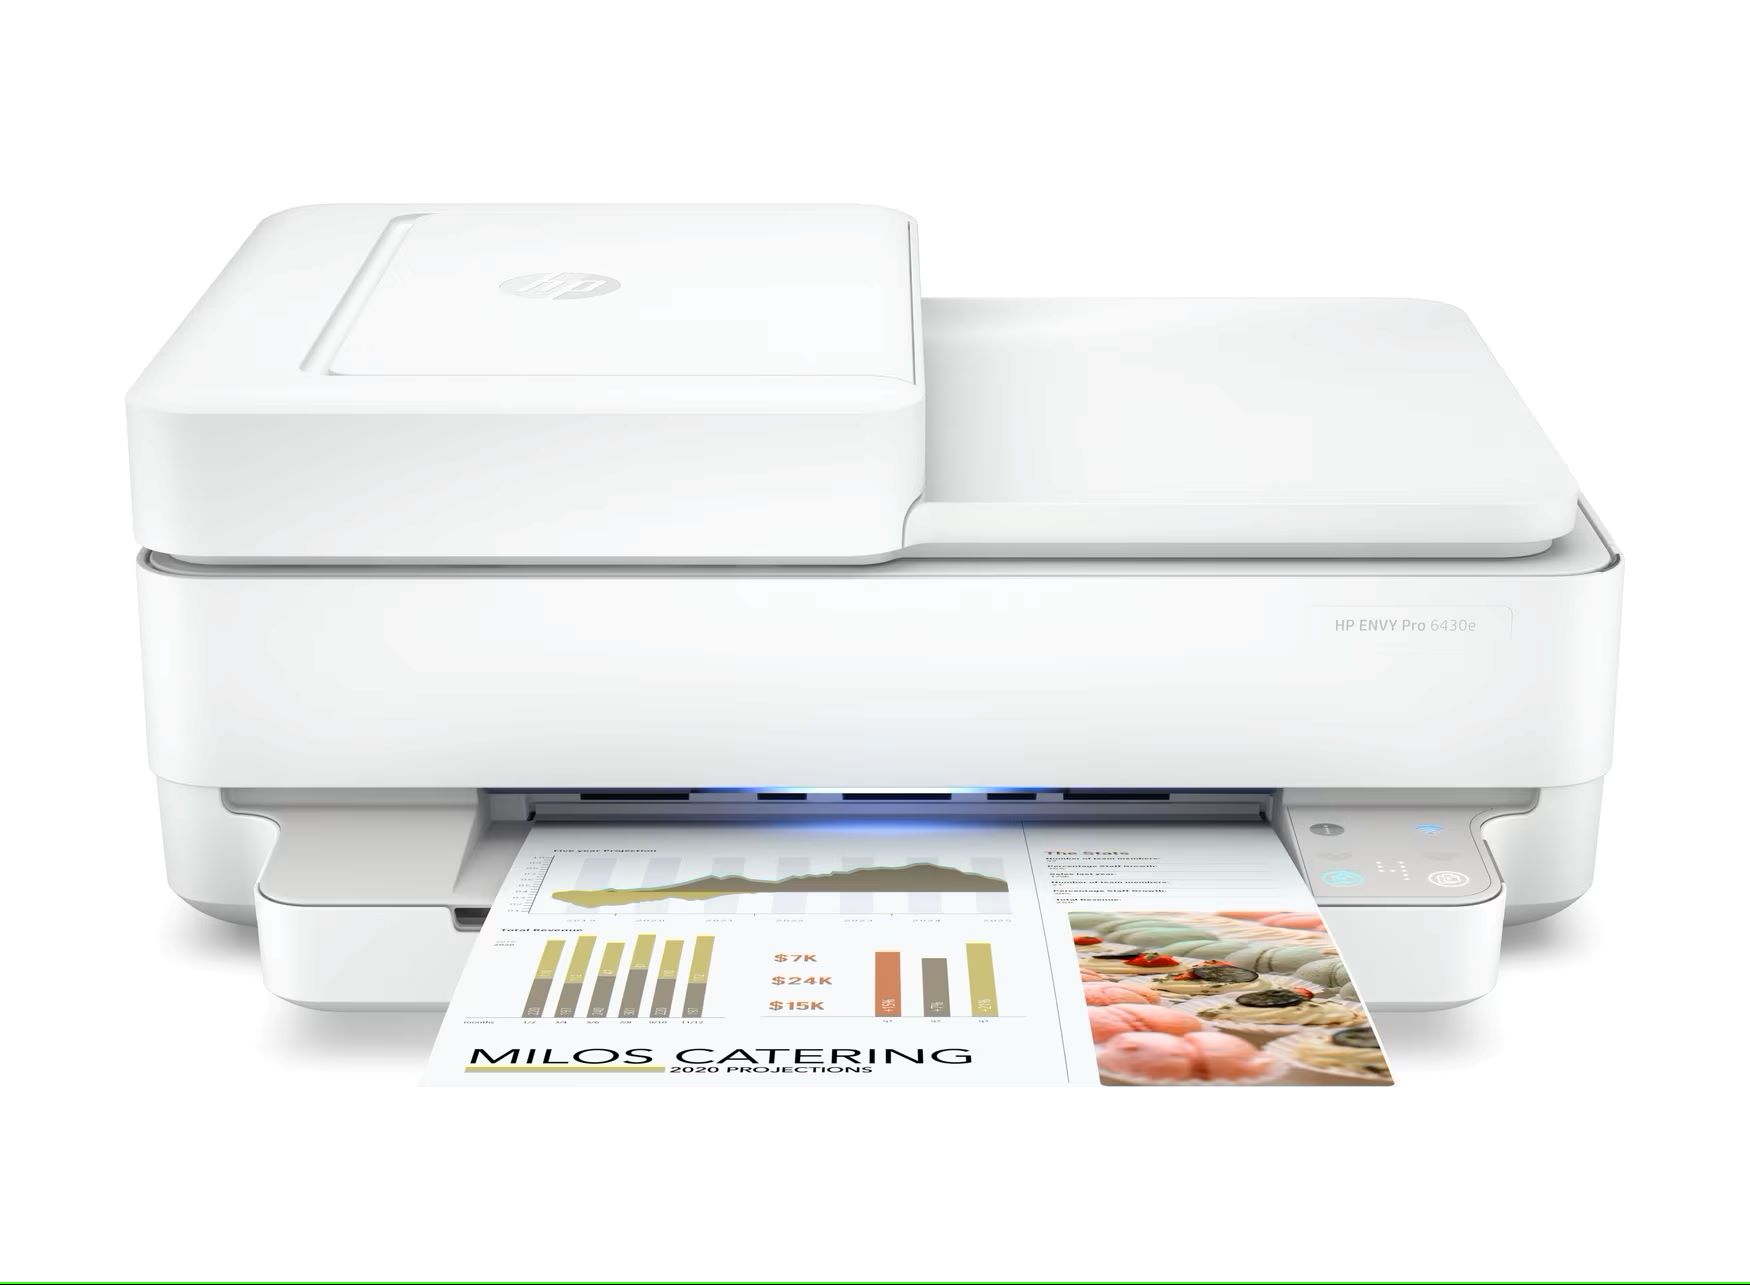 How Do I Set Up My HP Printer To Scan To My Computer?